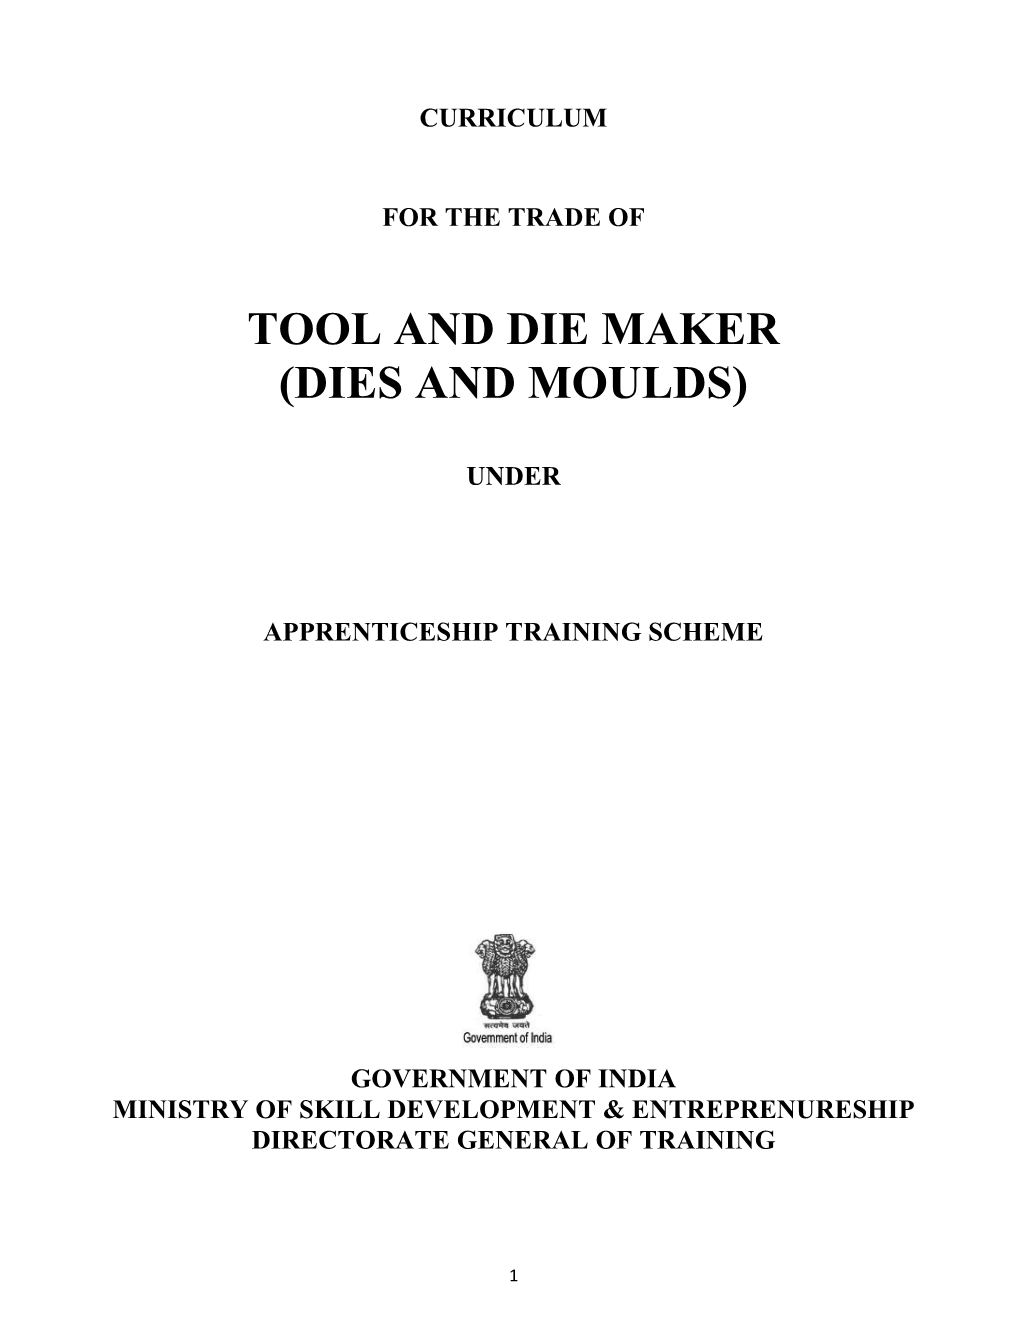 Tool and Die Maker (Dies and Moulds)